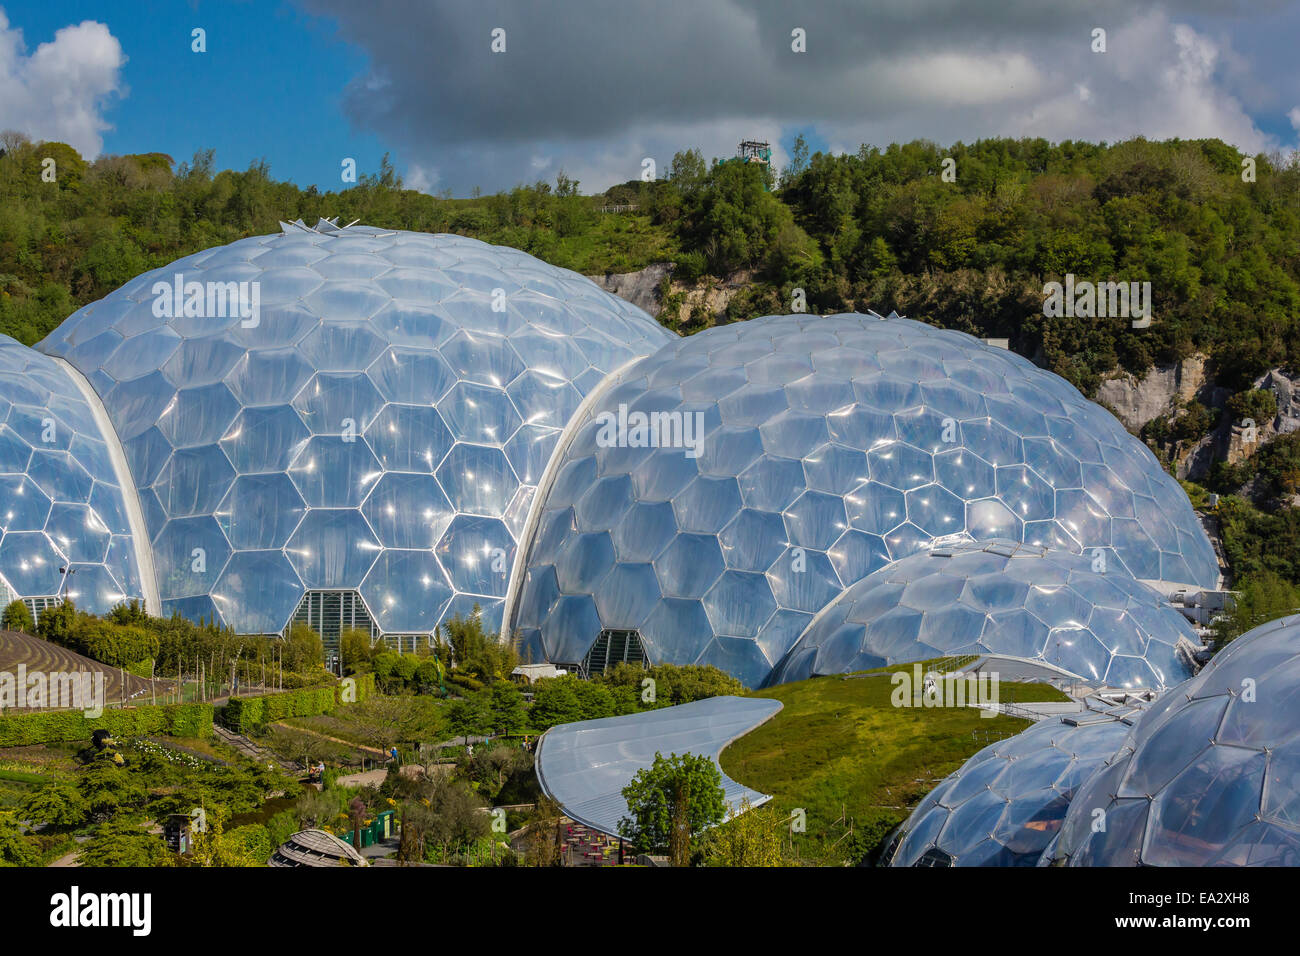 The Eden Project, consisting of greenhouse domes simulating biomes from around the world, St. Austell, Cornwall, England, UK Stock Photo